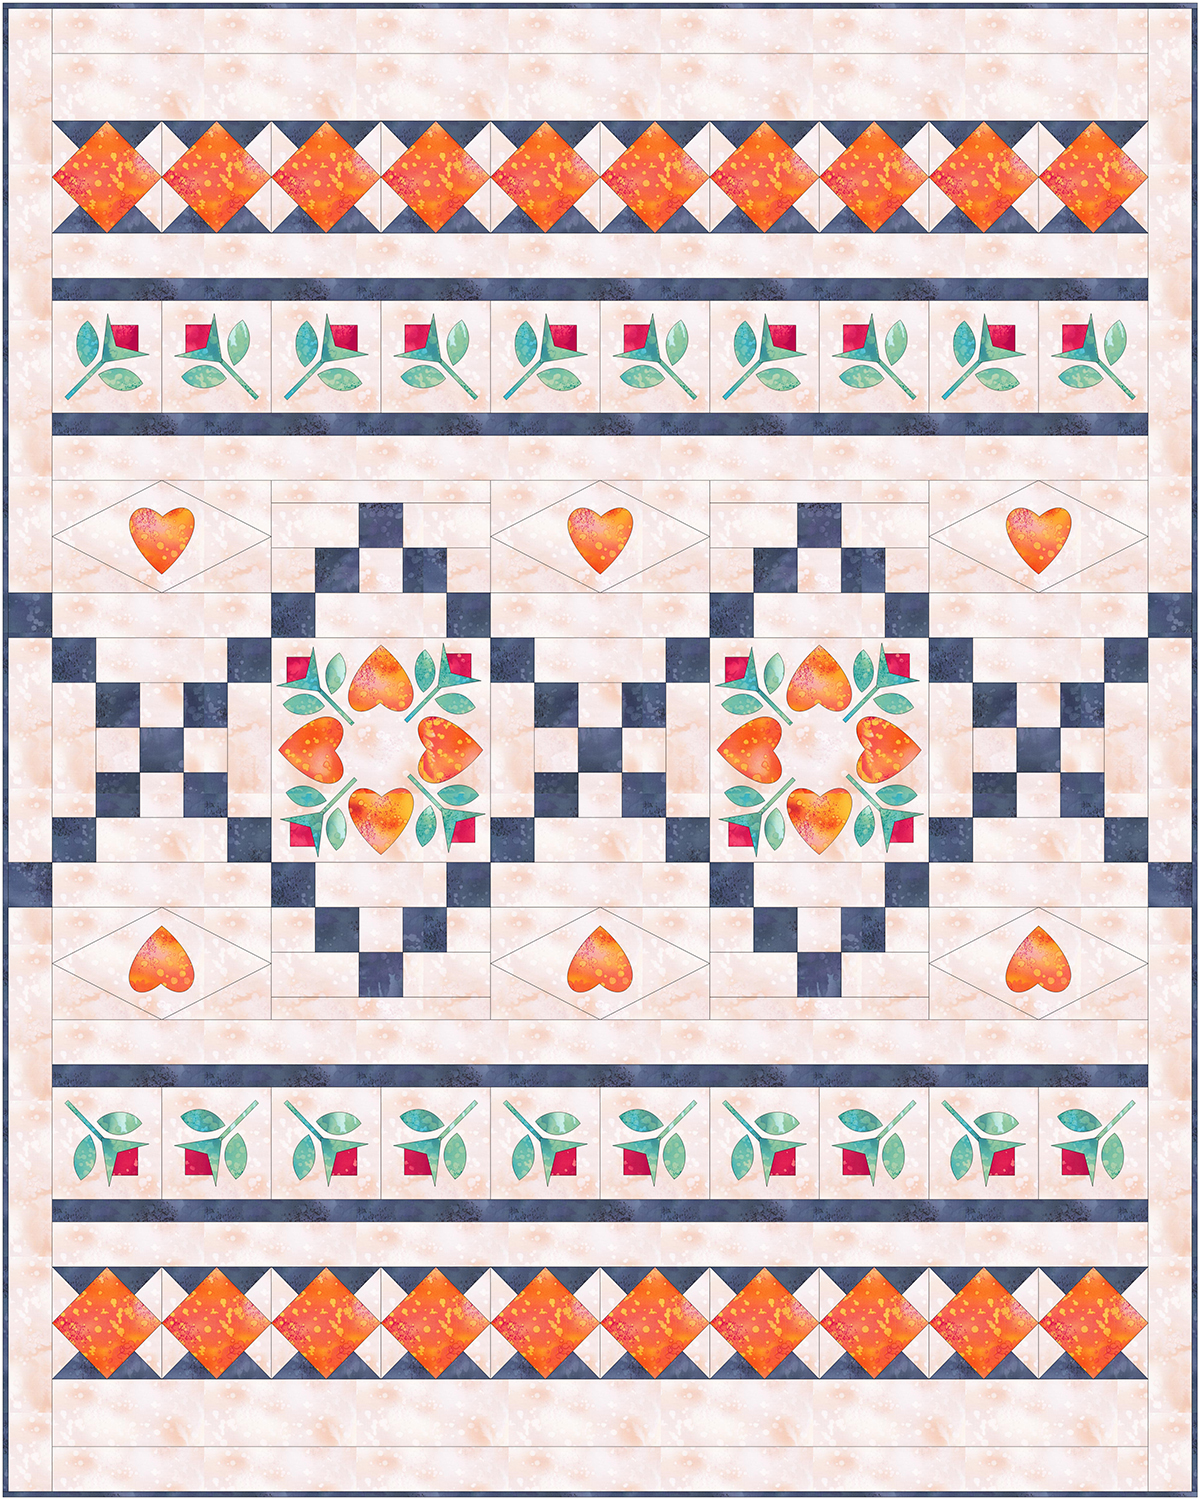 Cozy Quilt Designs 'Strip Club' Pattern - Dresden Bloom (Finished Project Size Is 54 x 54)